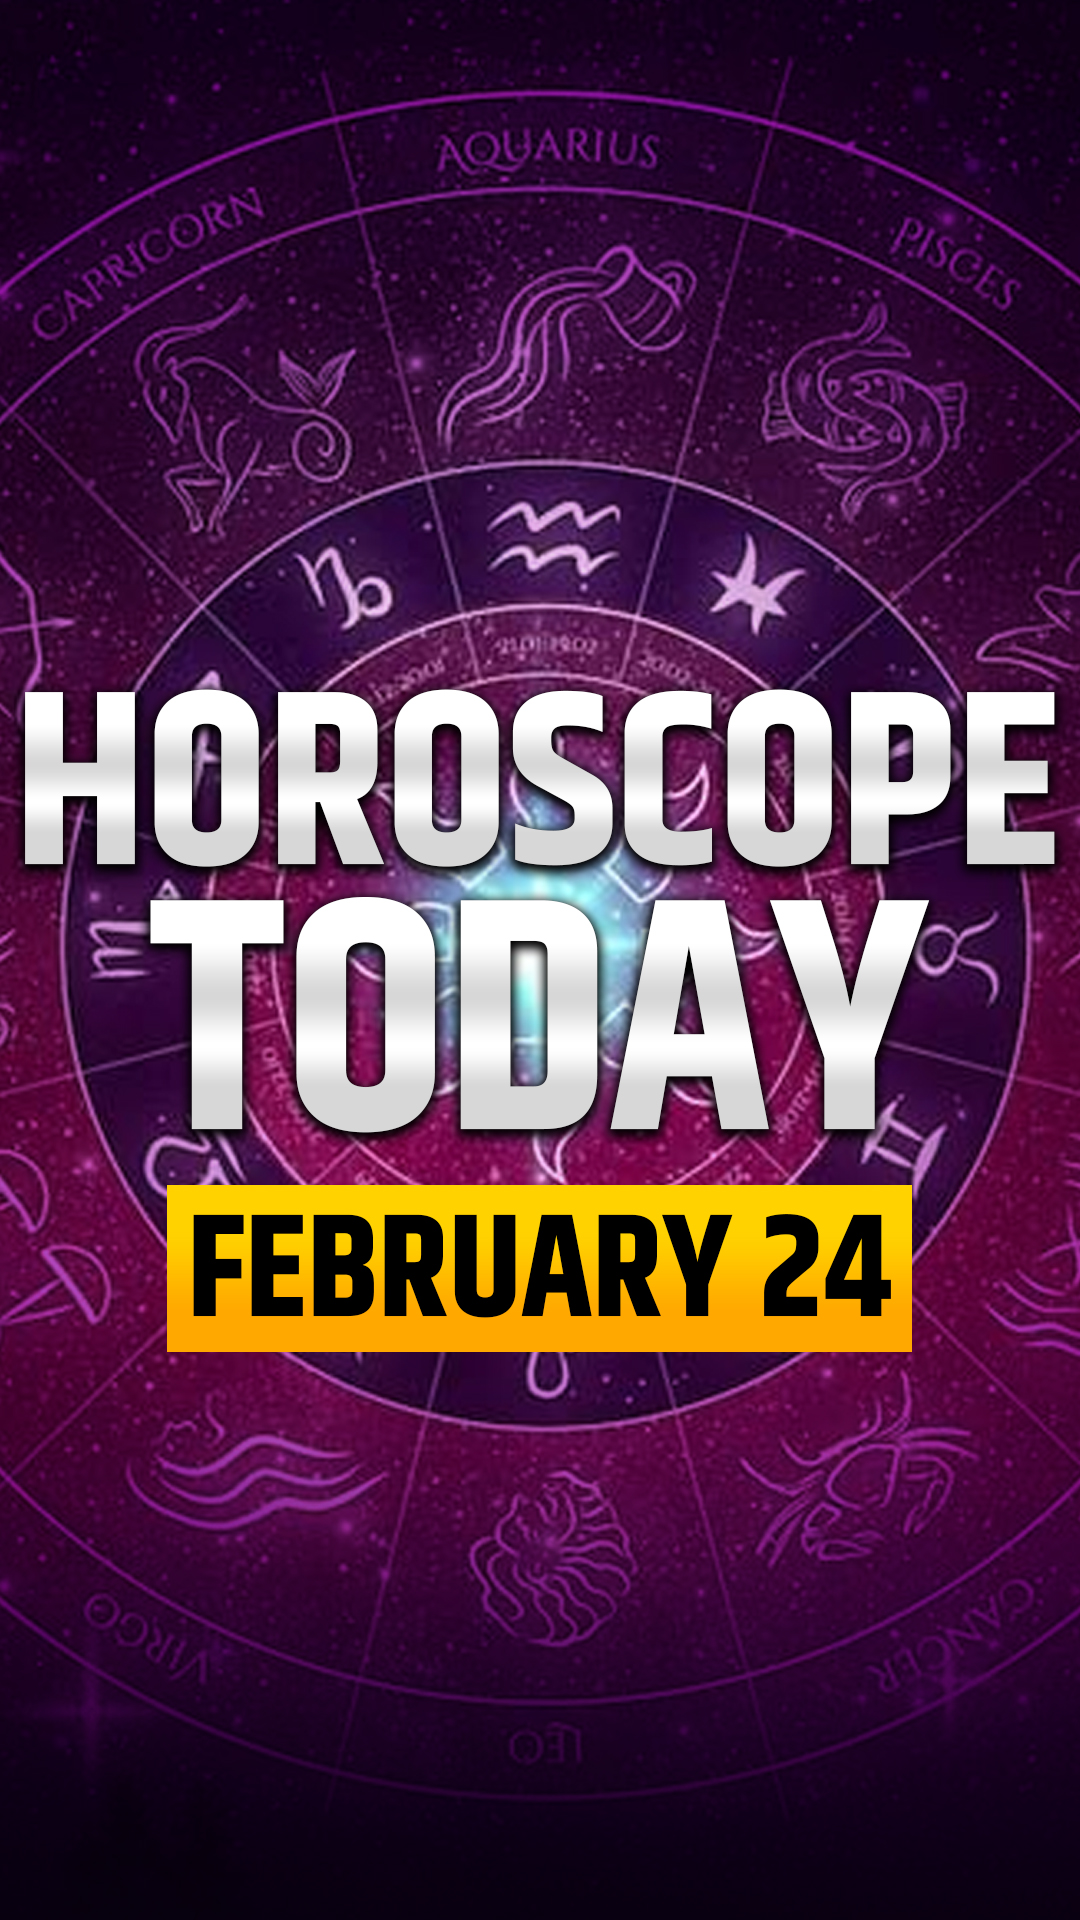 Know lucky colour, number of all zodiac signs for horoscope February 24